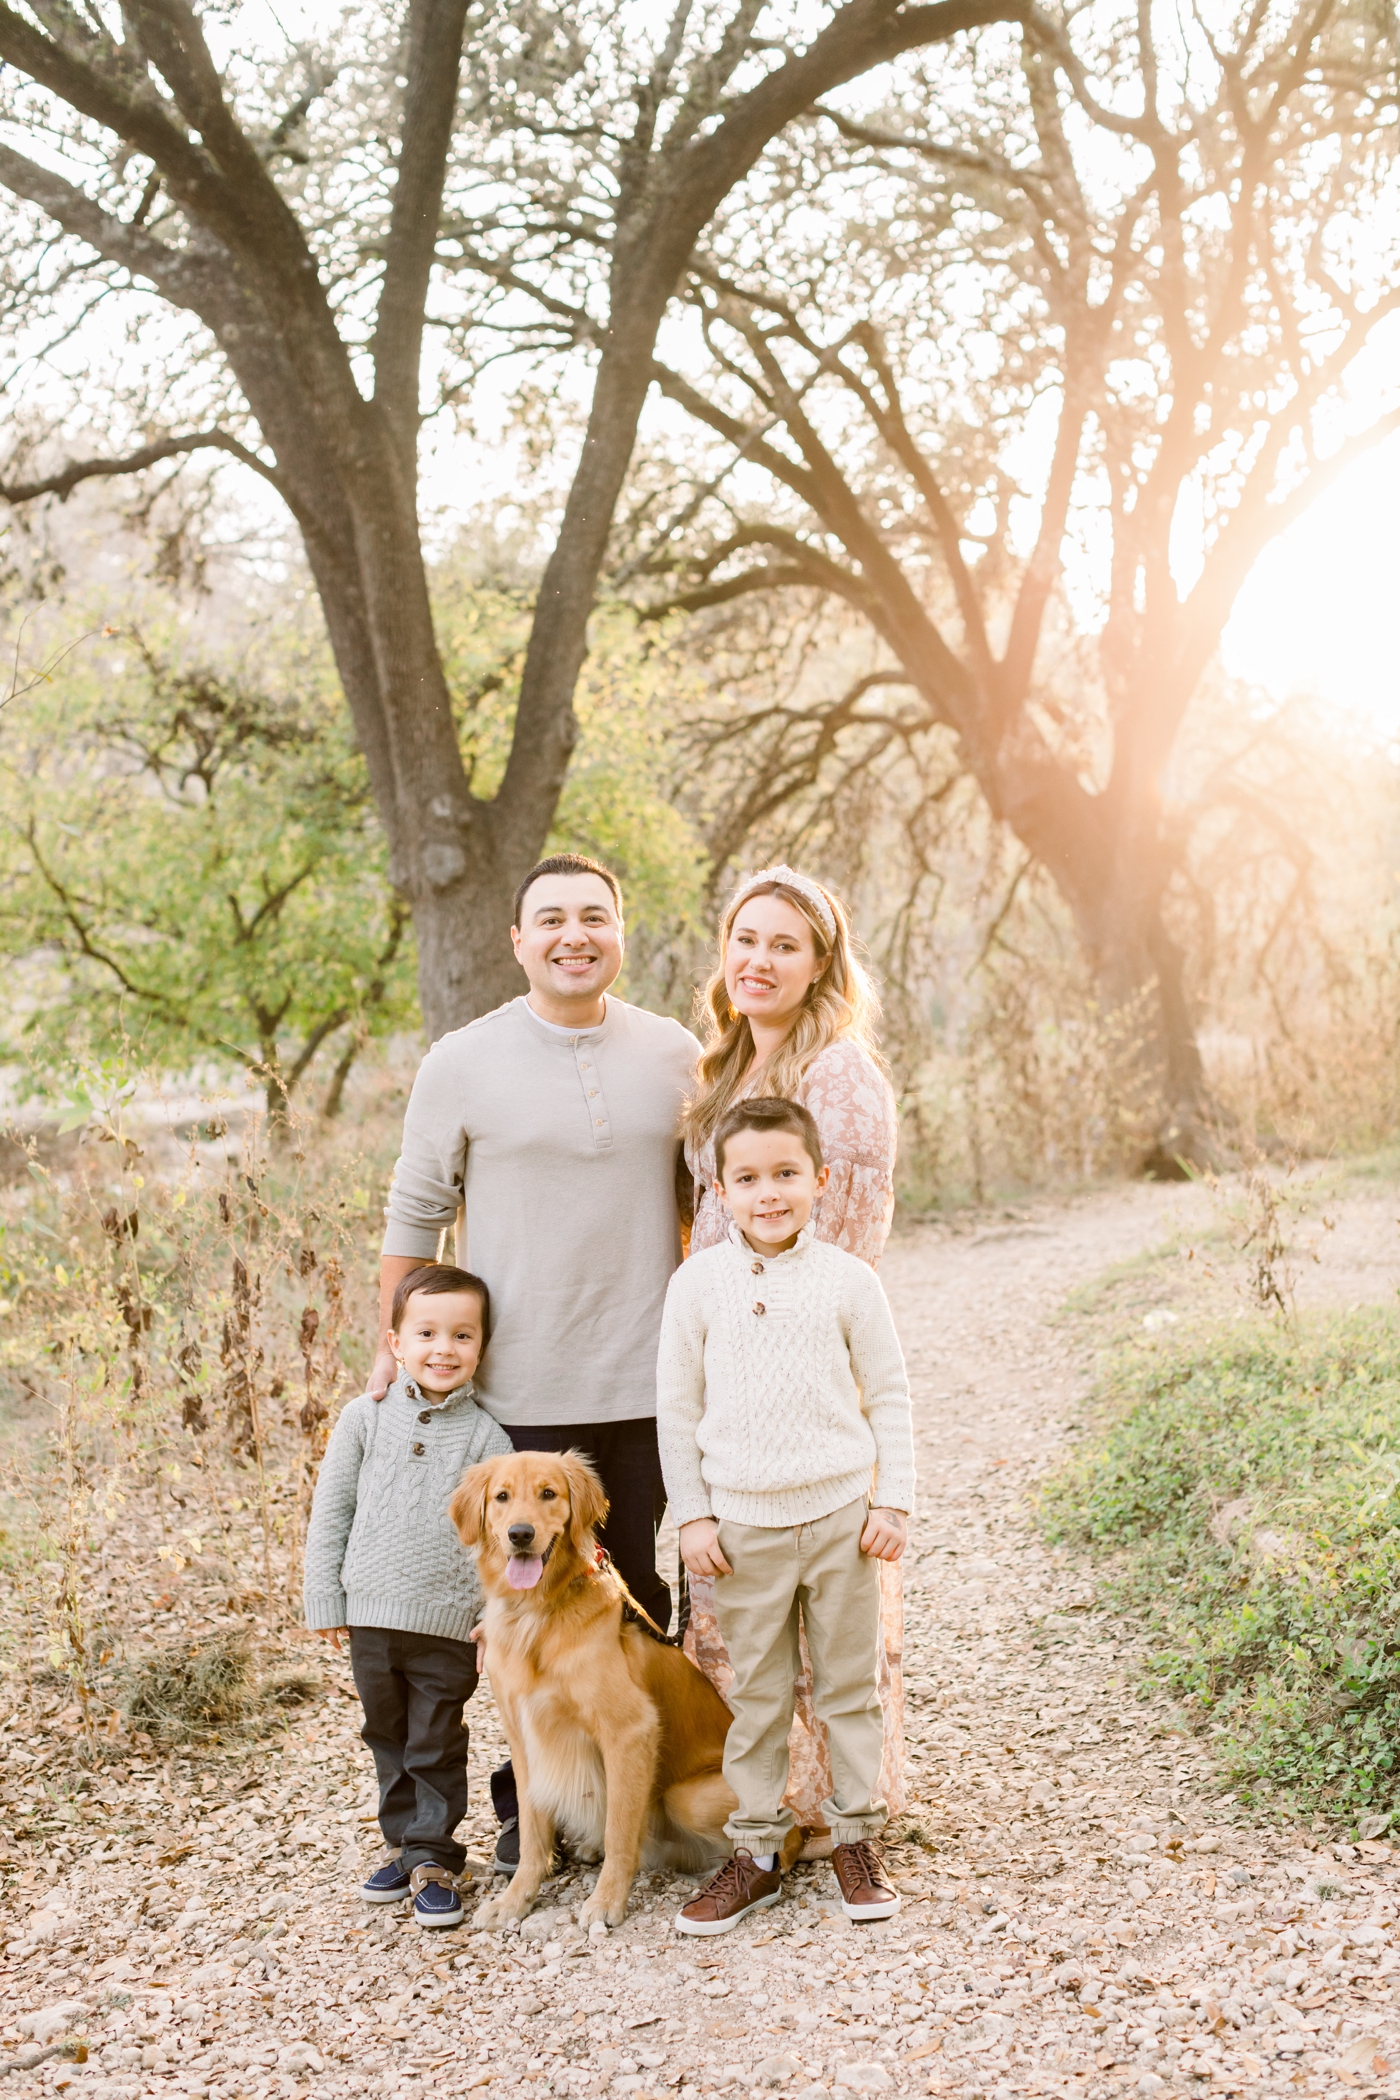 Family standing together with dog in the middle during sunset session. Photo by Sana Ahmed Photography.